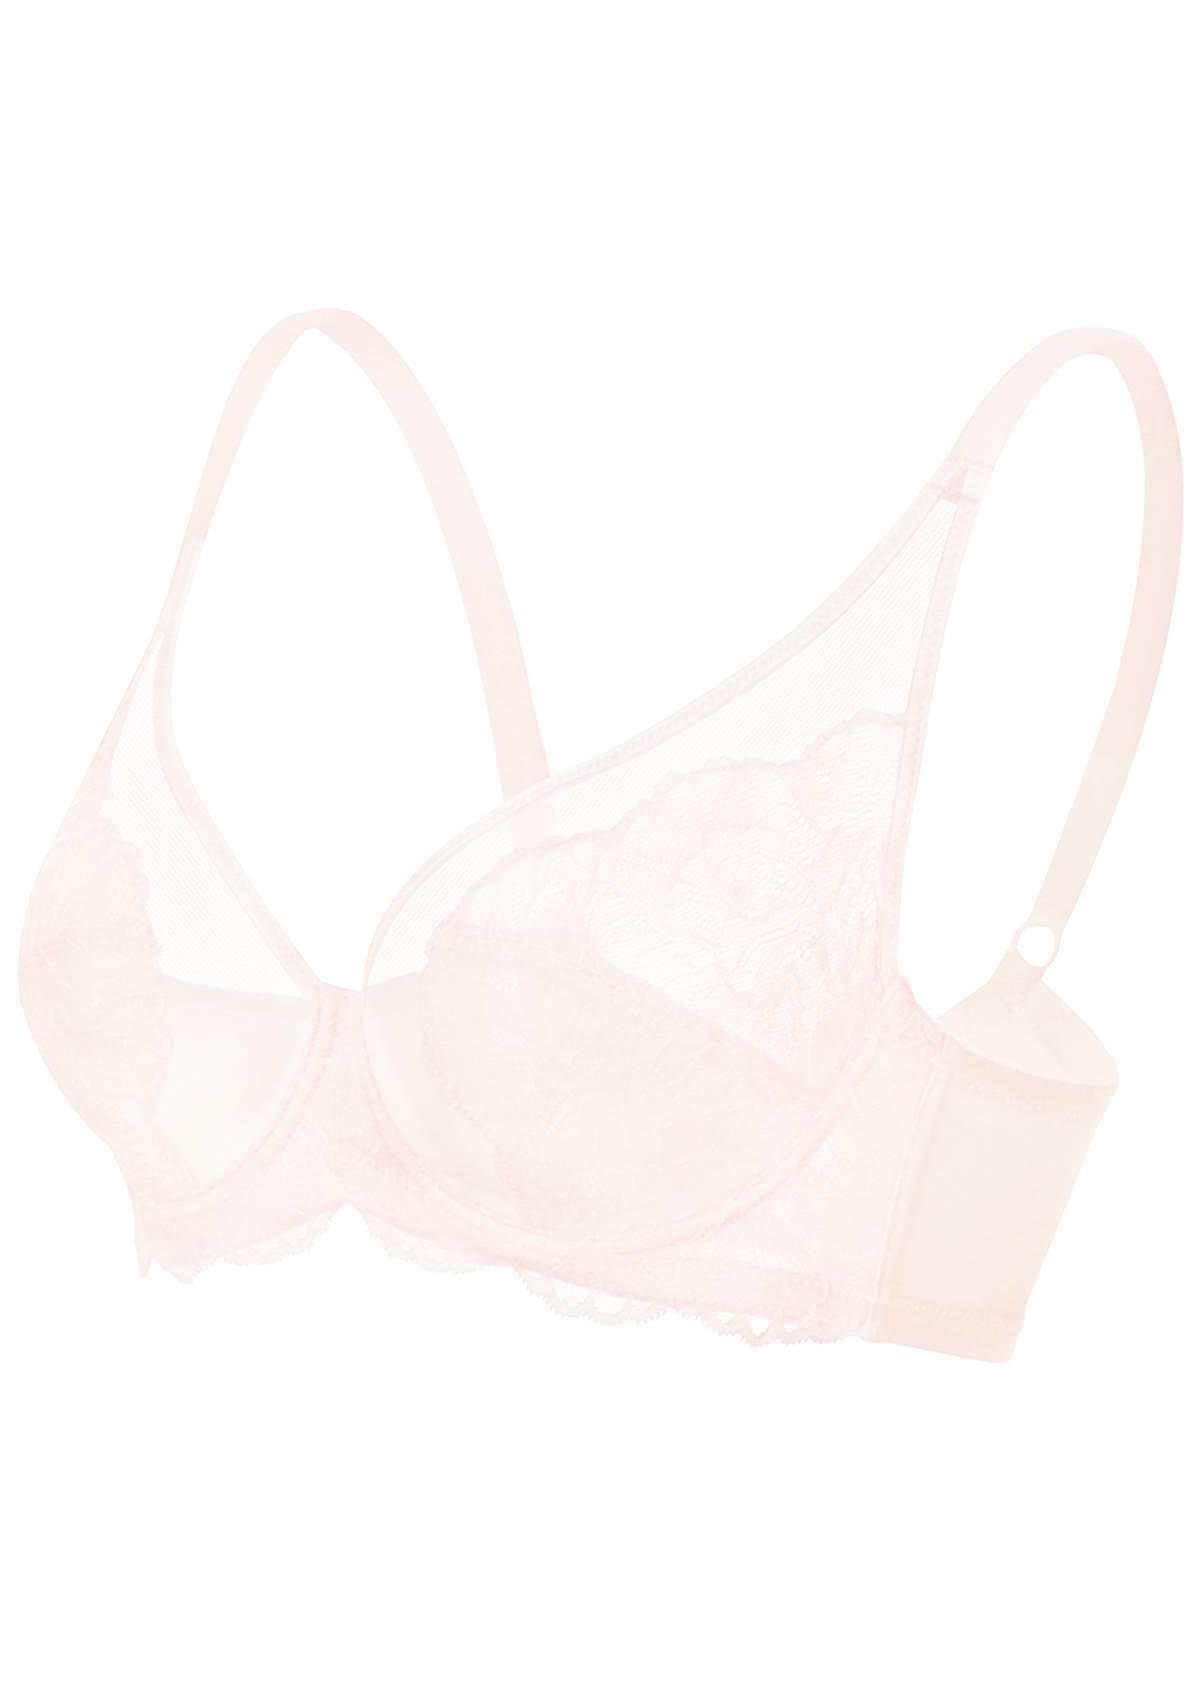 HSIA Blossom Sheer Lace Bra: Comfortable Underwire Bra For Big Busts - White / 36 / DDD/F